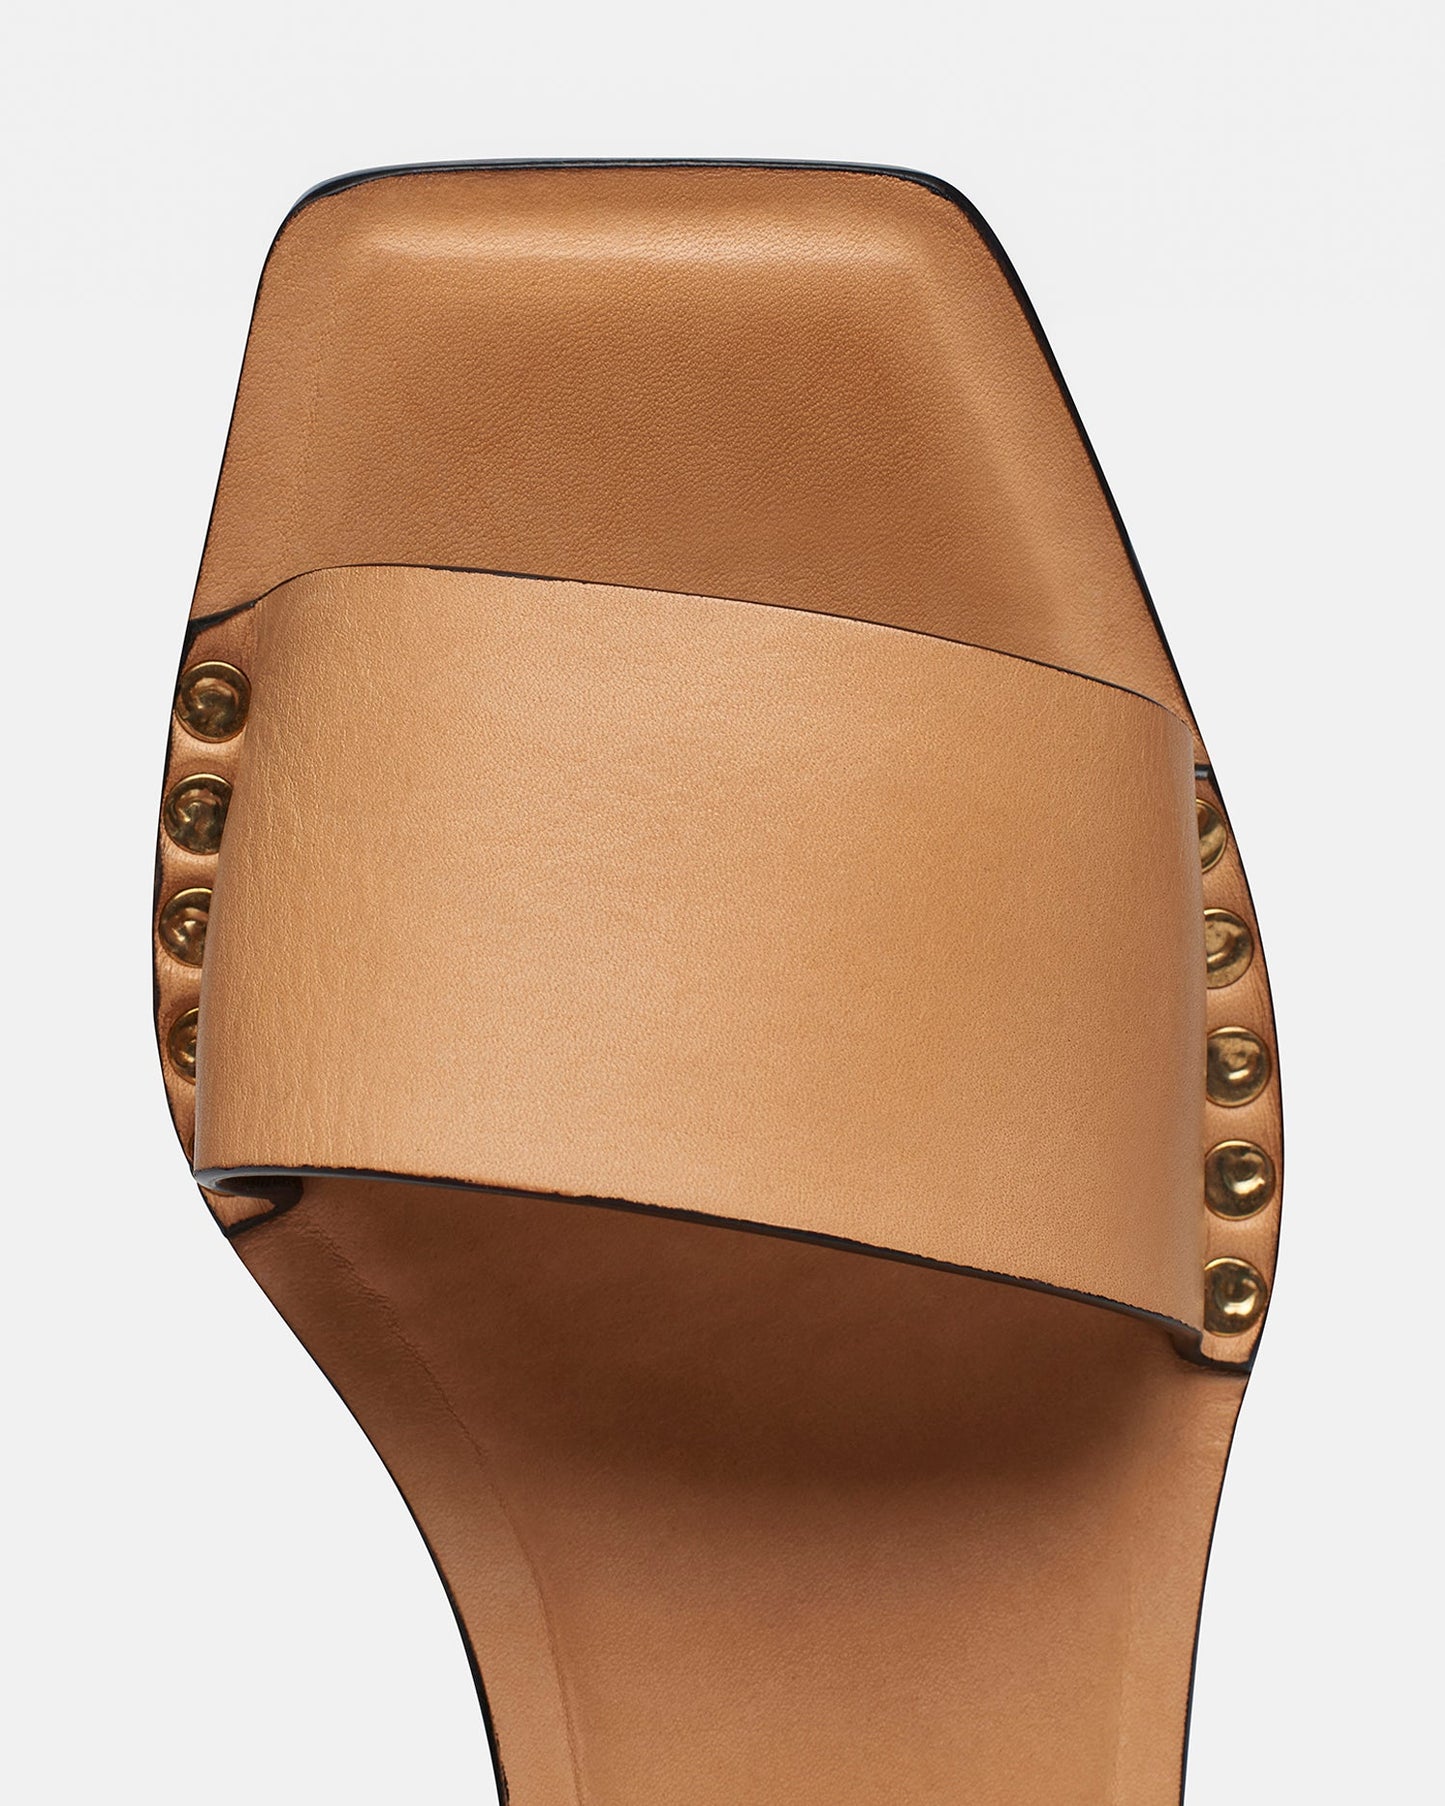 Ibiron - Leather Sandals - Natural Tan